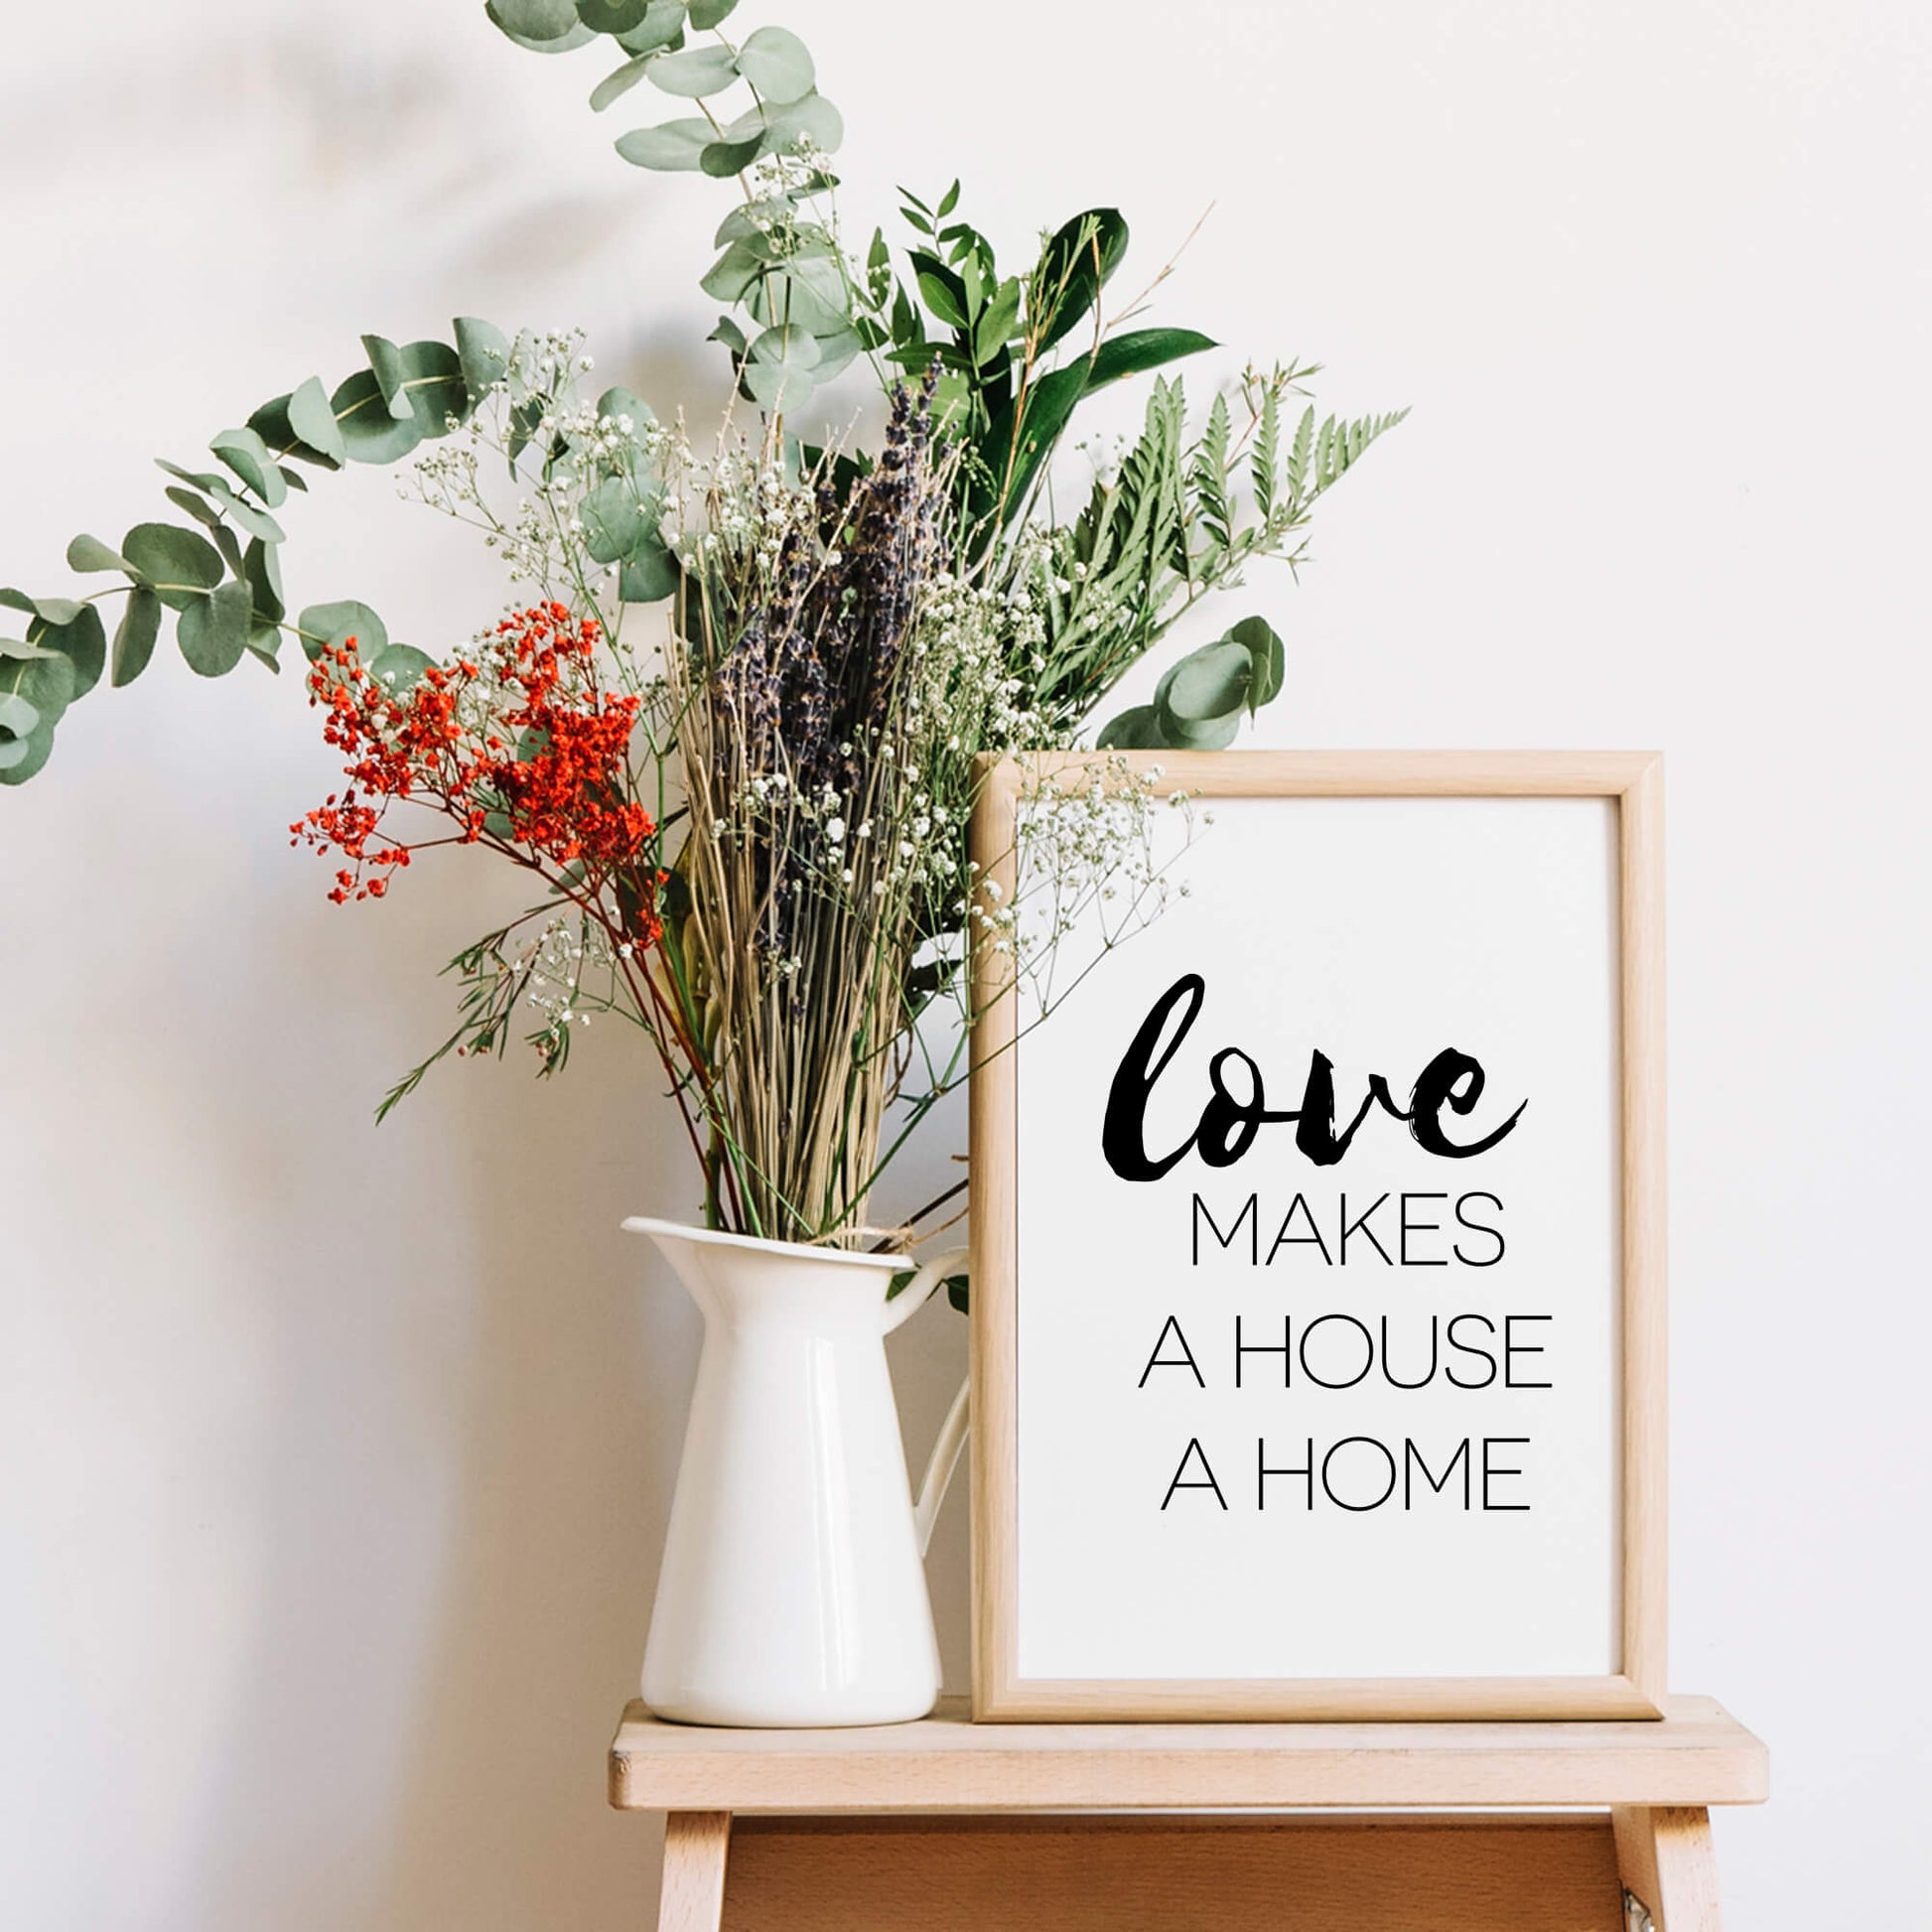 Love Makes A House A Home Wallprint by SixElevenCreations. Product Code SEP0108